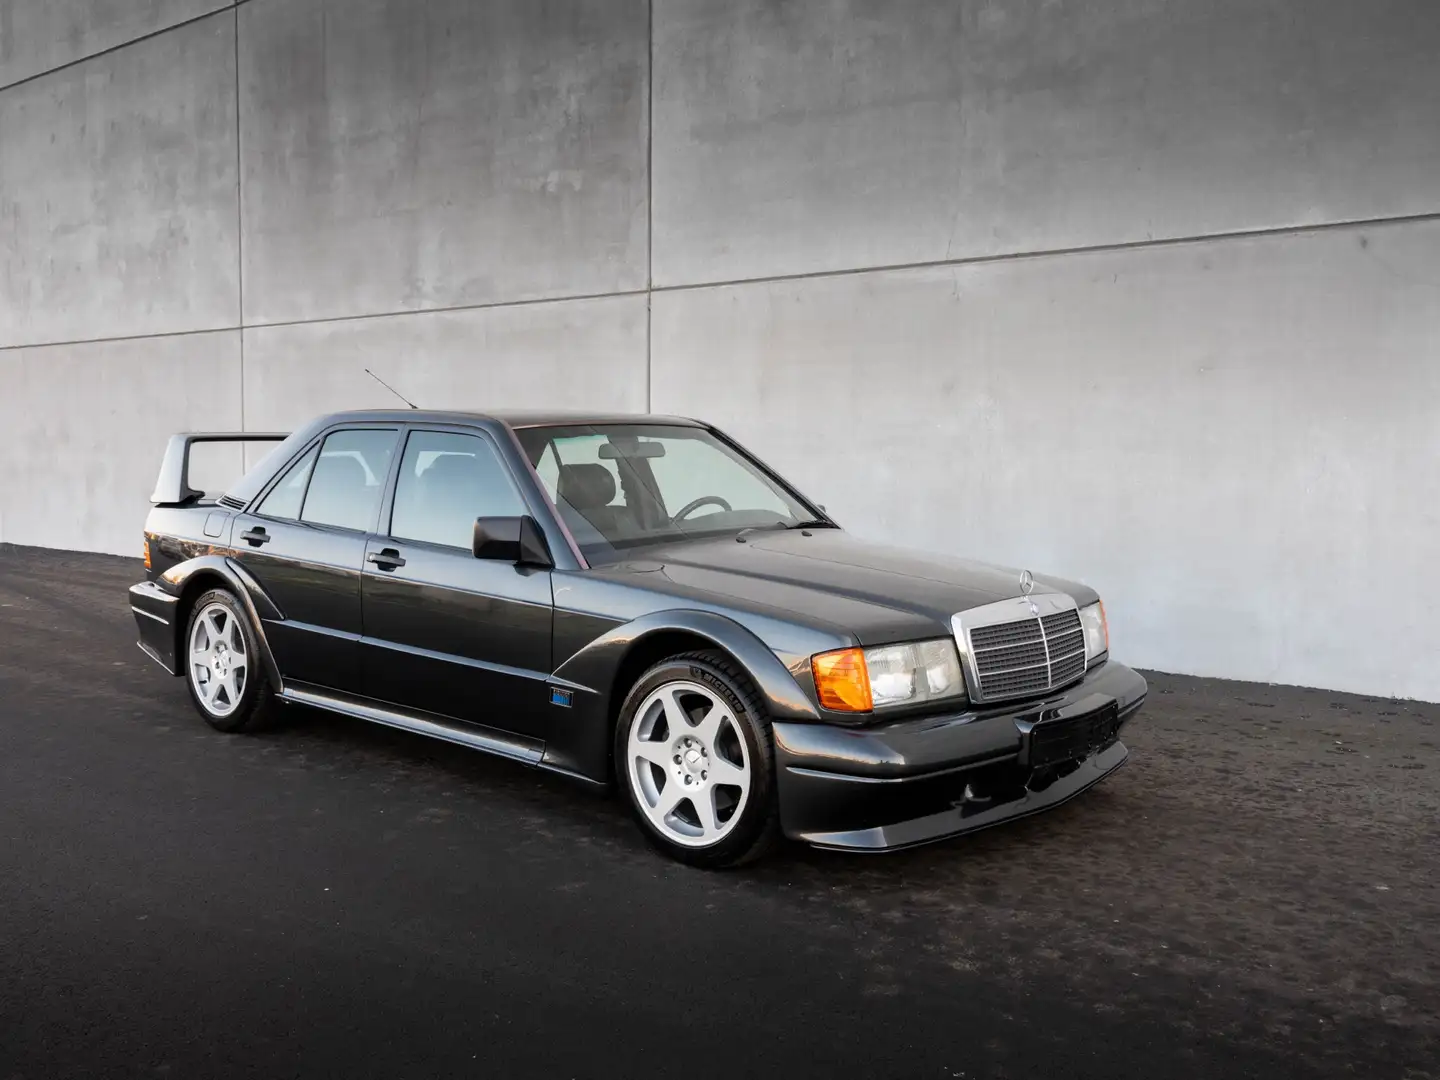 Mercedes-Benz 190 E 2.5-16 EVOLUTION 2 WANT TO BUY Negro - 1